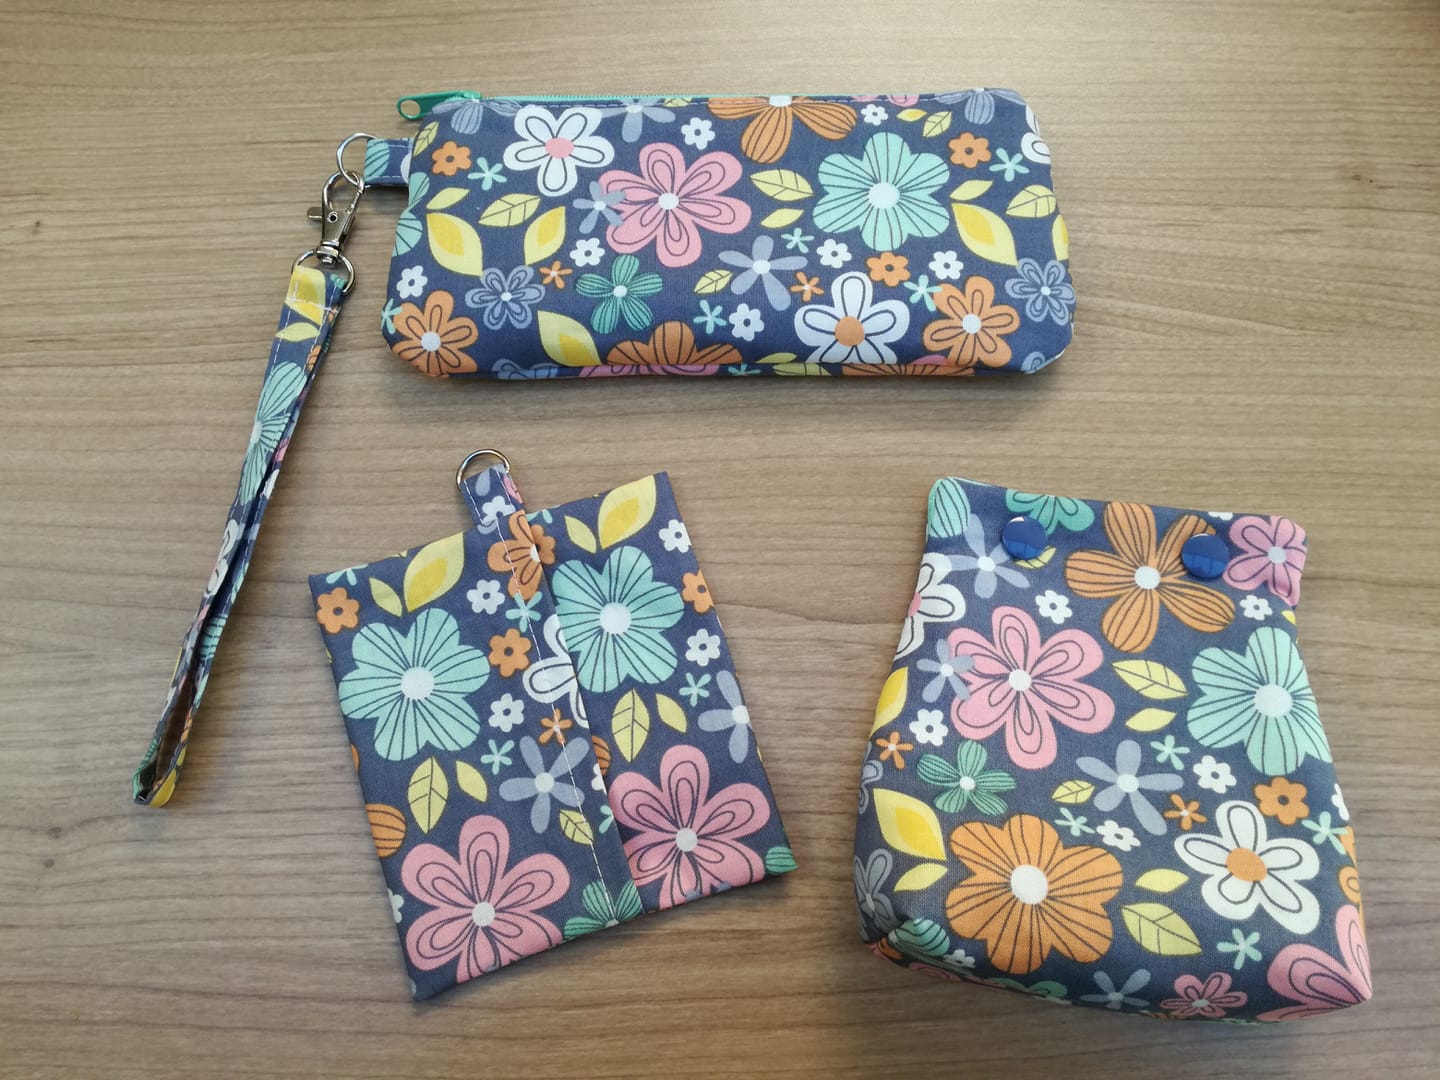 Sewing pattern: Handy purse organizer with snaps – Sewing